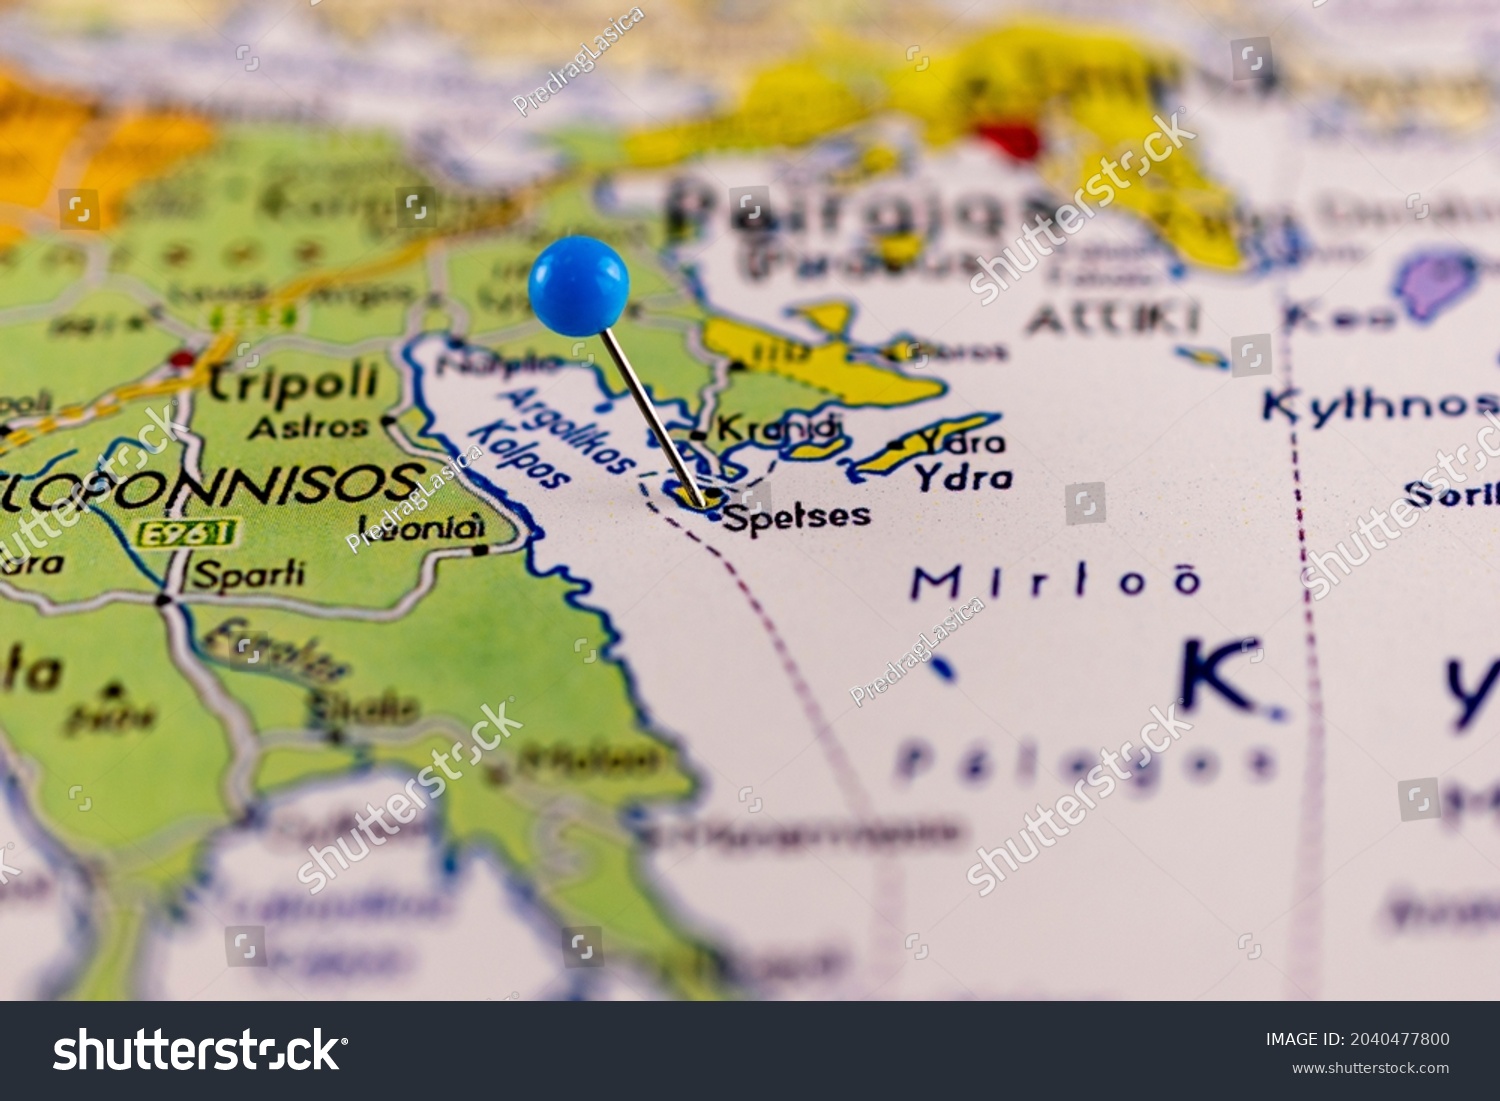 Stock Photo Spetses Island Pinned On A Map Of Greece Map With Pin Point Of Spetses Island In Greece 2040477800 